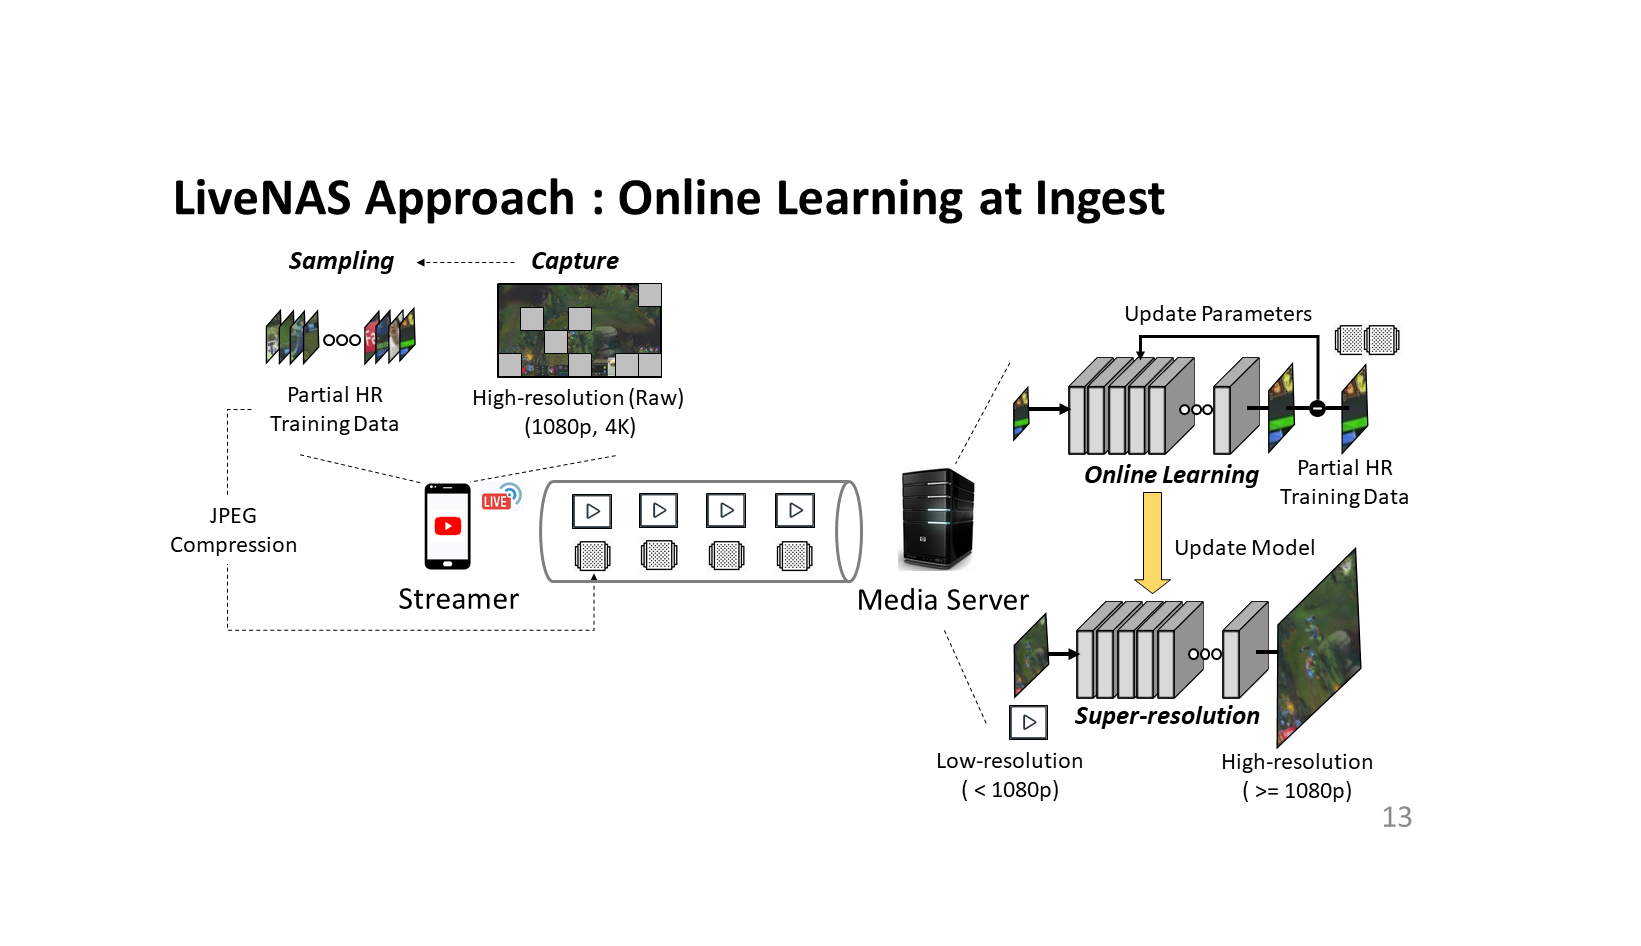 Professor Dongsu Han’s research team has developed a high-quality live video streaming system based on online learning